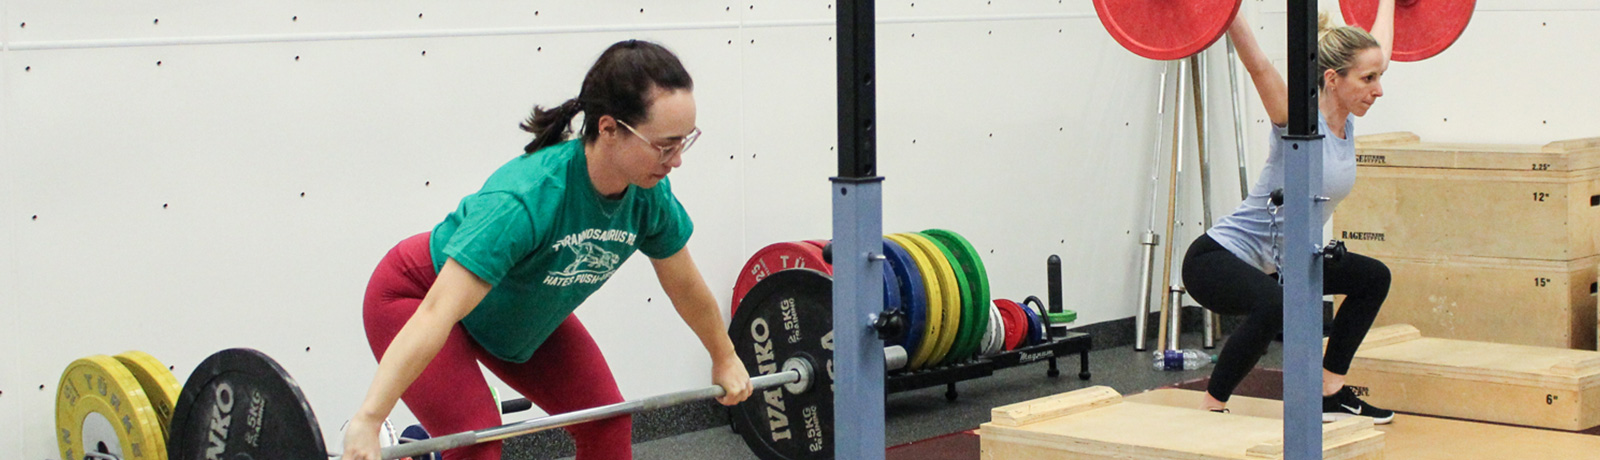 female students weightlifting